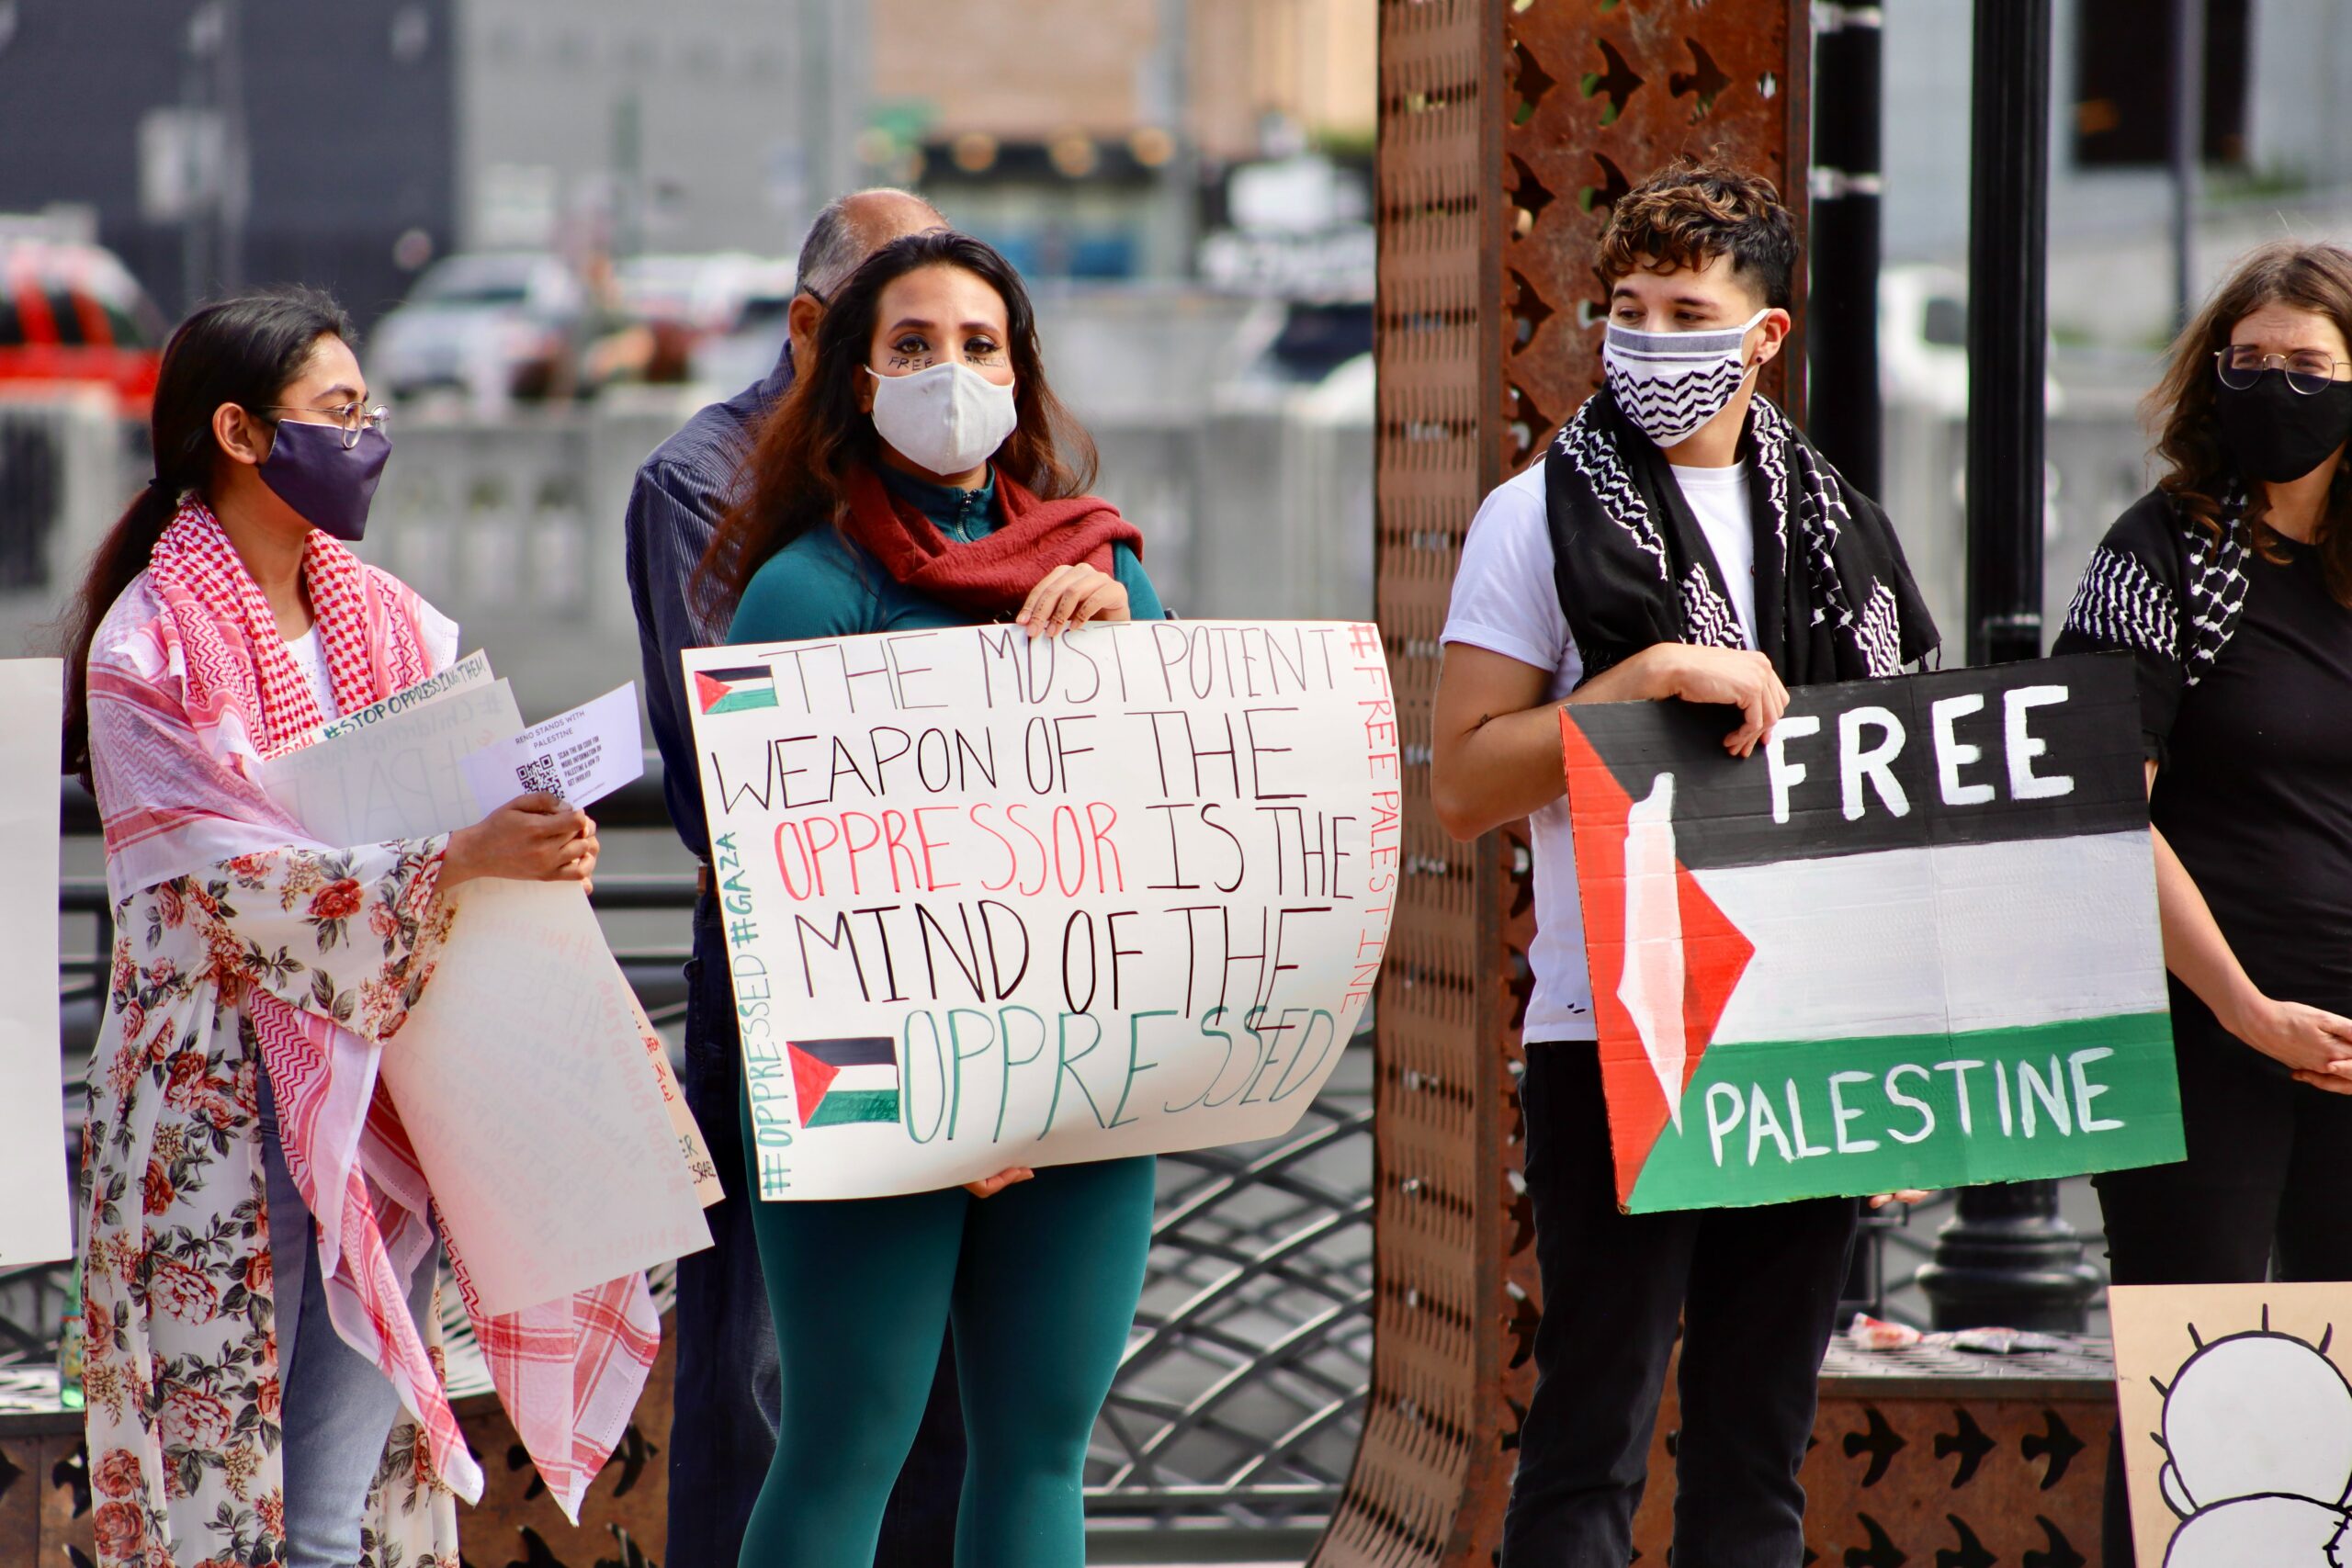 Protestors are standing holding signs that read “Free Palestine” and “The most potent weapon of the oppressor is the mind of the oppressed.” An individual in all blue is staring at the camera, while those around them are looking in their direction.